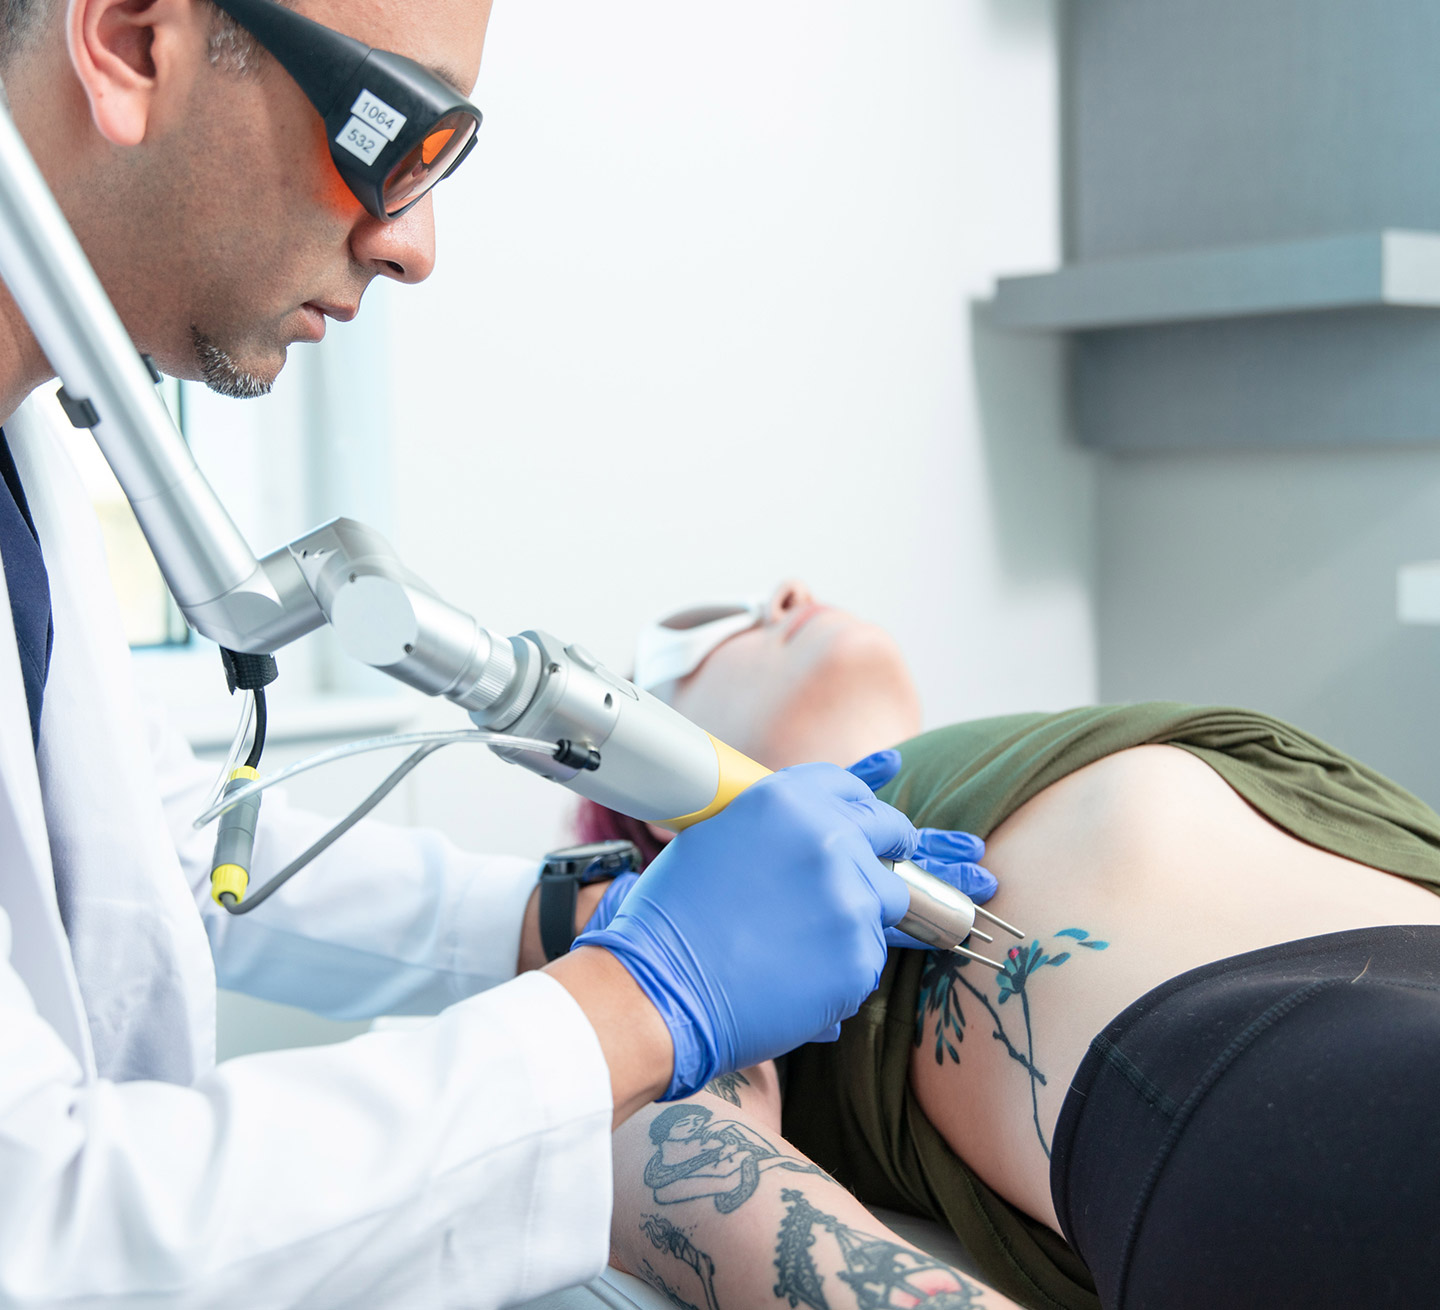 Tattoo Removal: A Different Kind of Medicine - AAPA